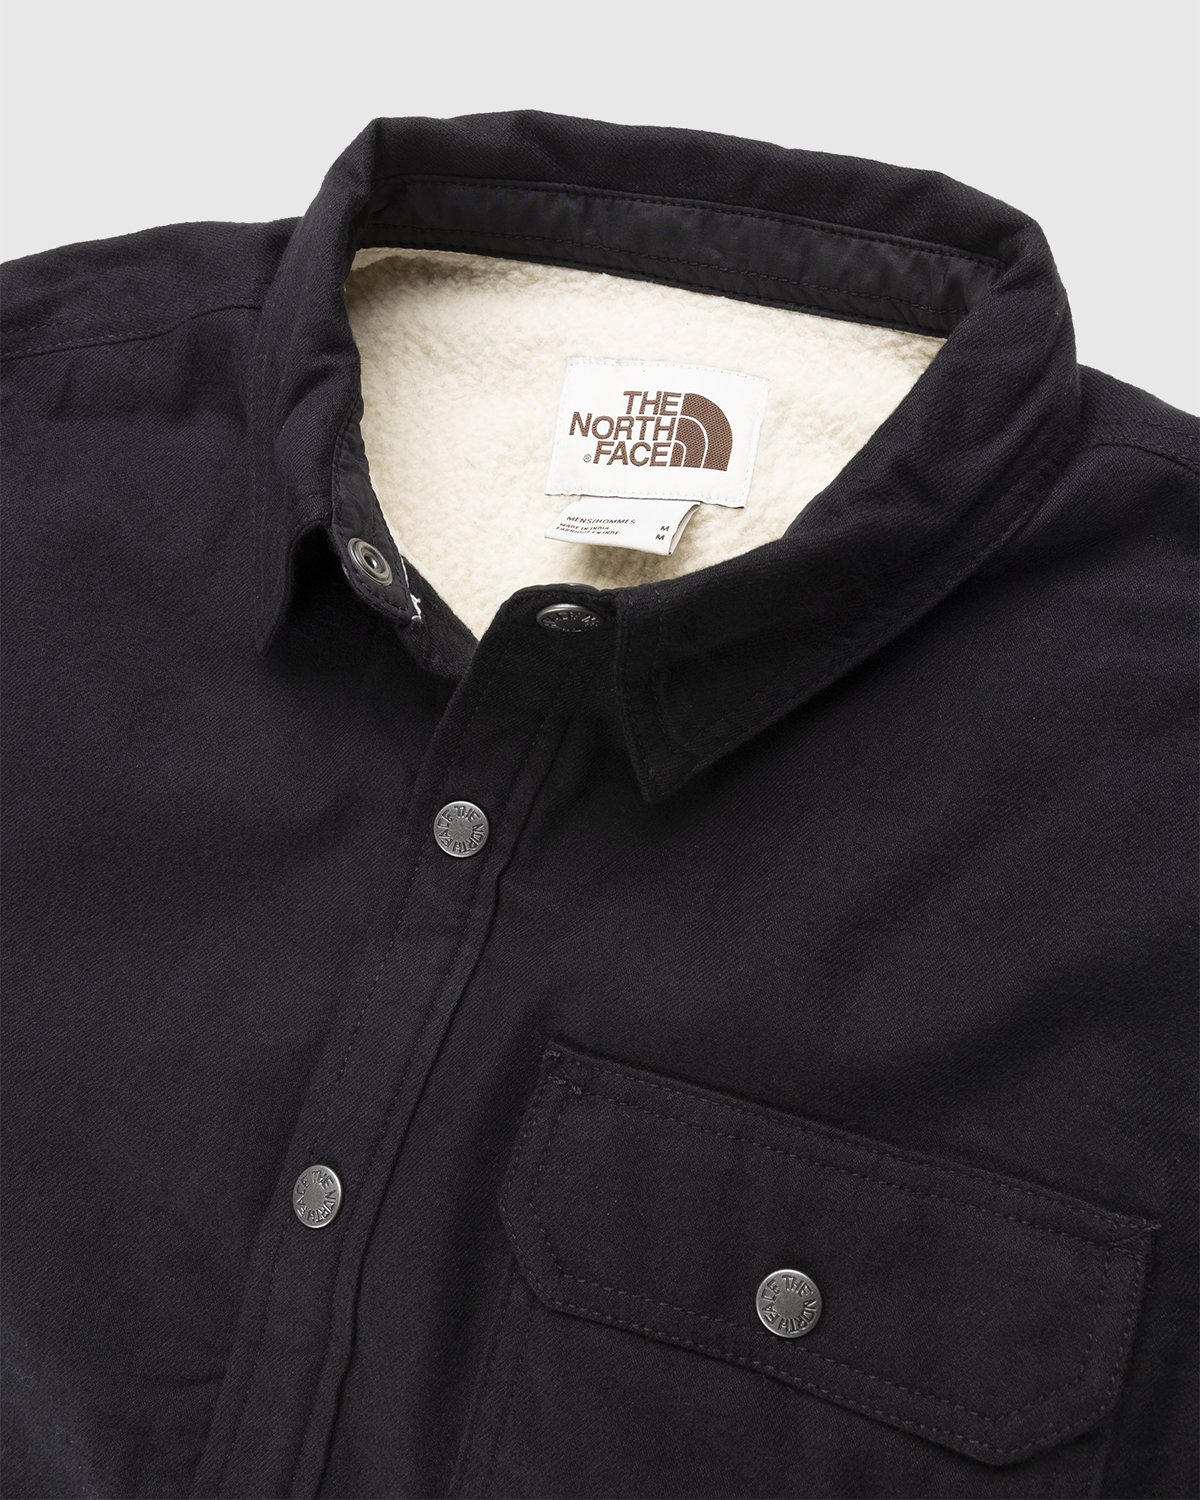 The North Face - Campshire Shirt Black - Clothing - Black - Image 4